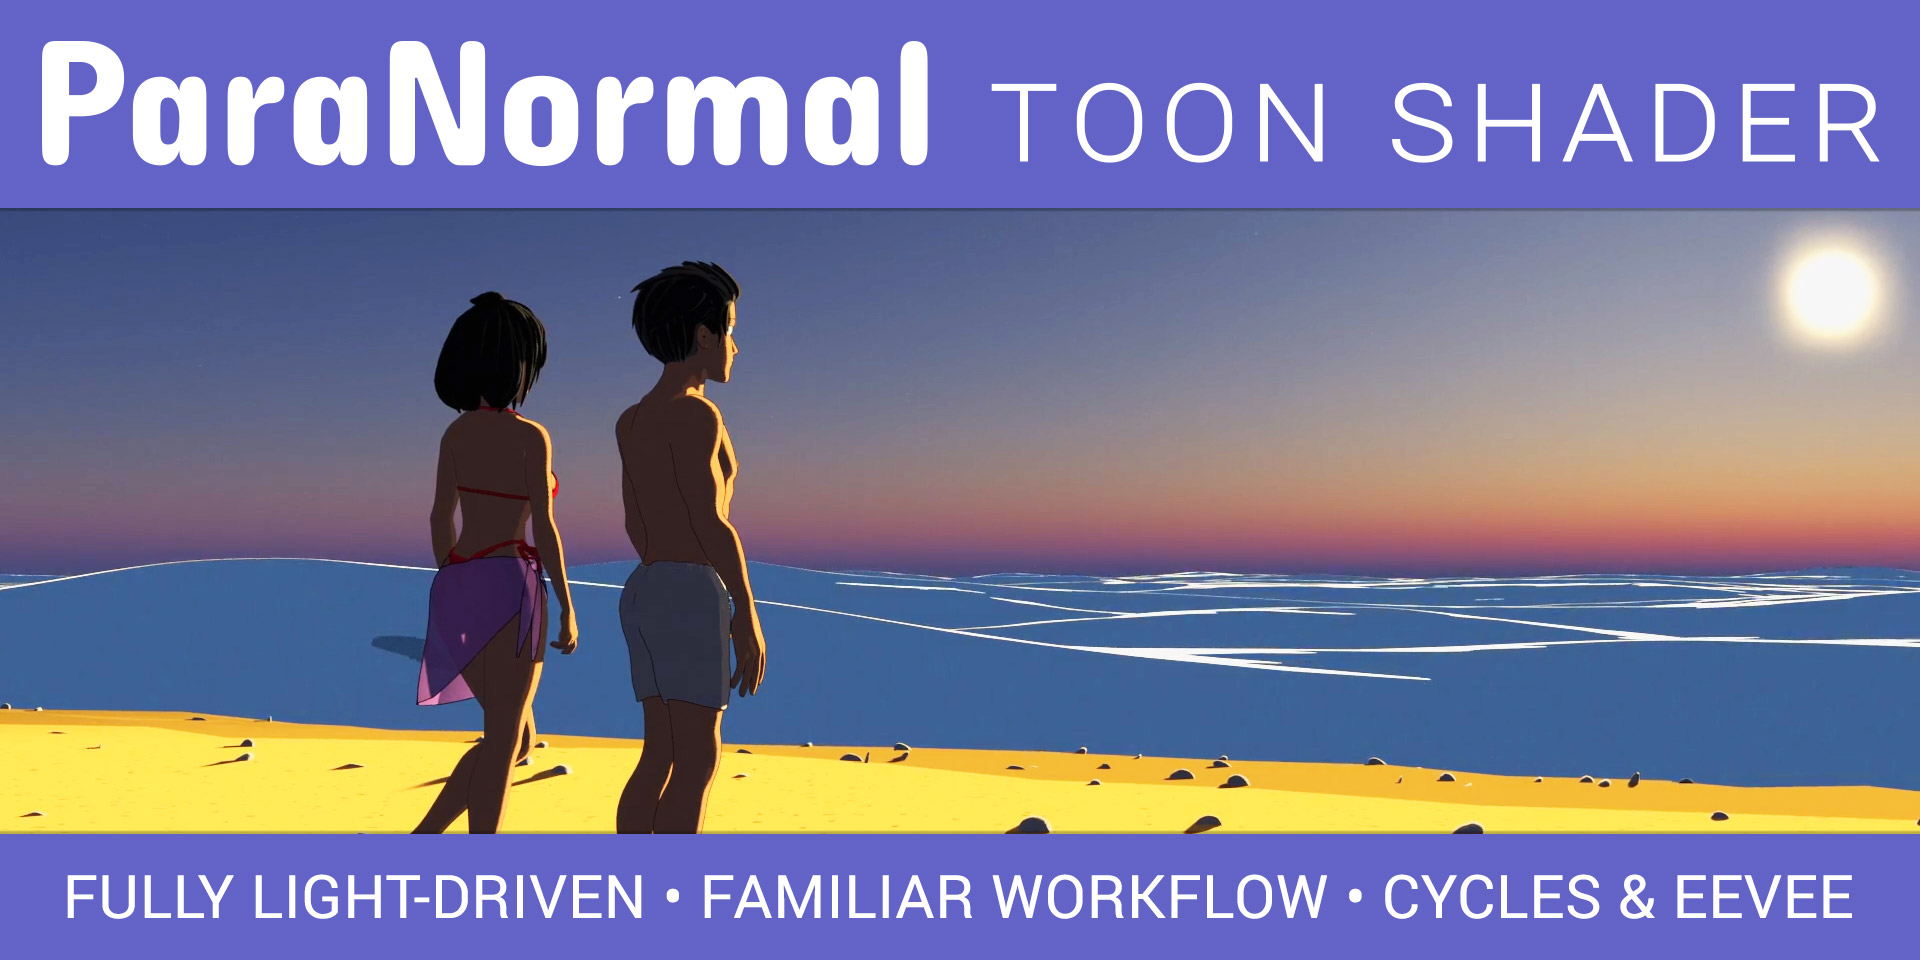 ParaNormal Toon Shader – Fully Light-Driven, Familiar Workflow, Cycles & Eevee